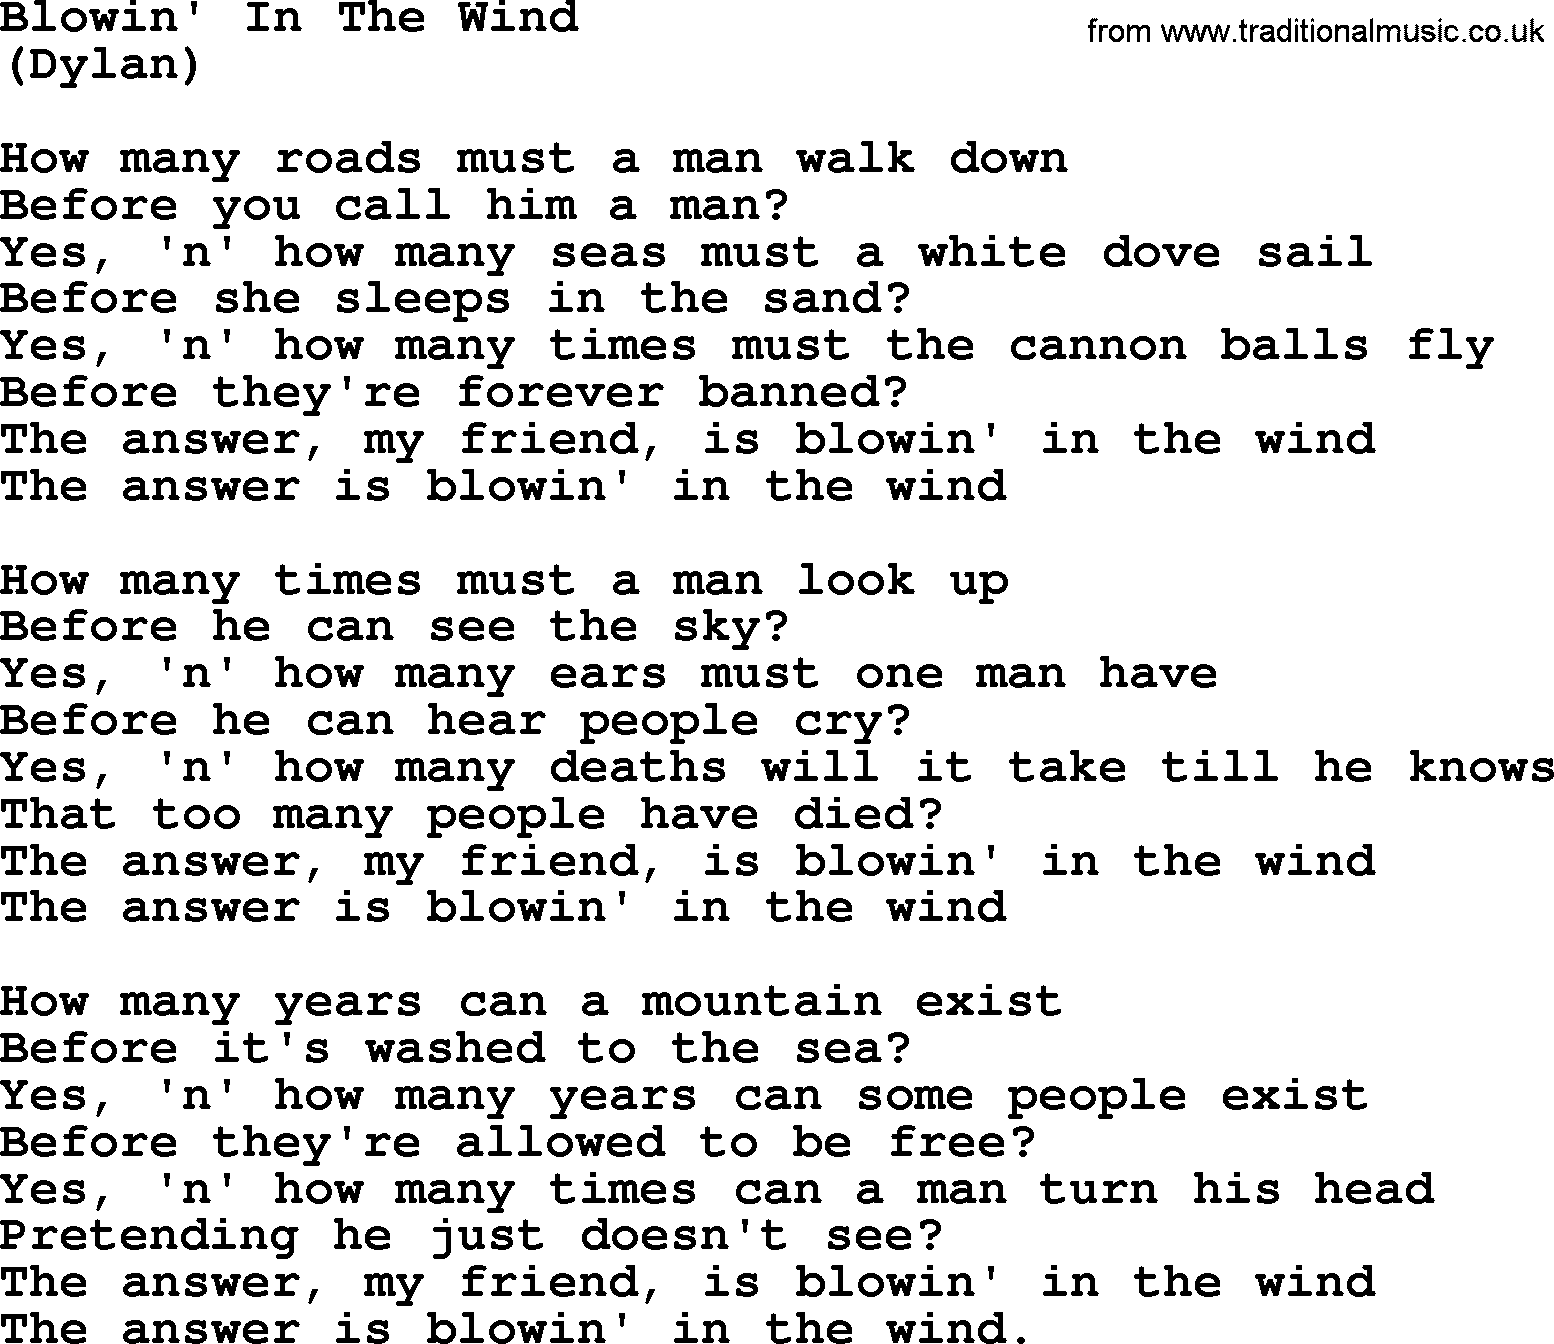 The Byrds song Blowin' In The Wind, lyrics